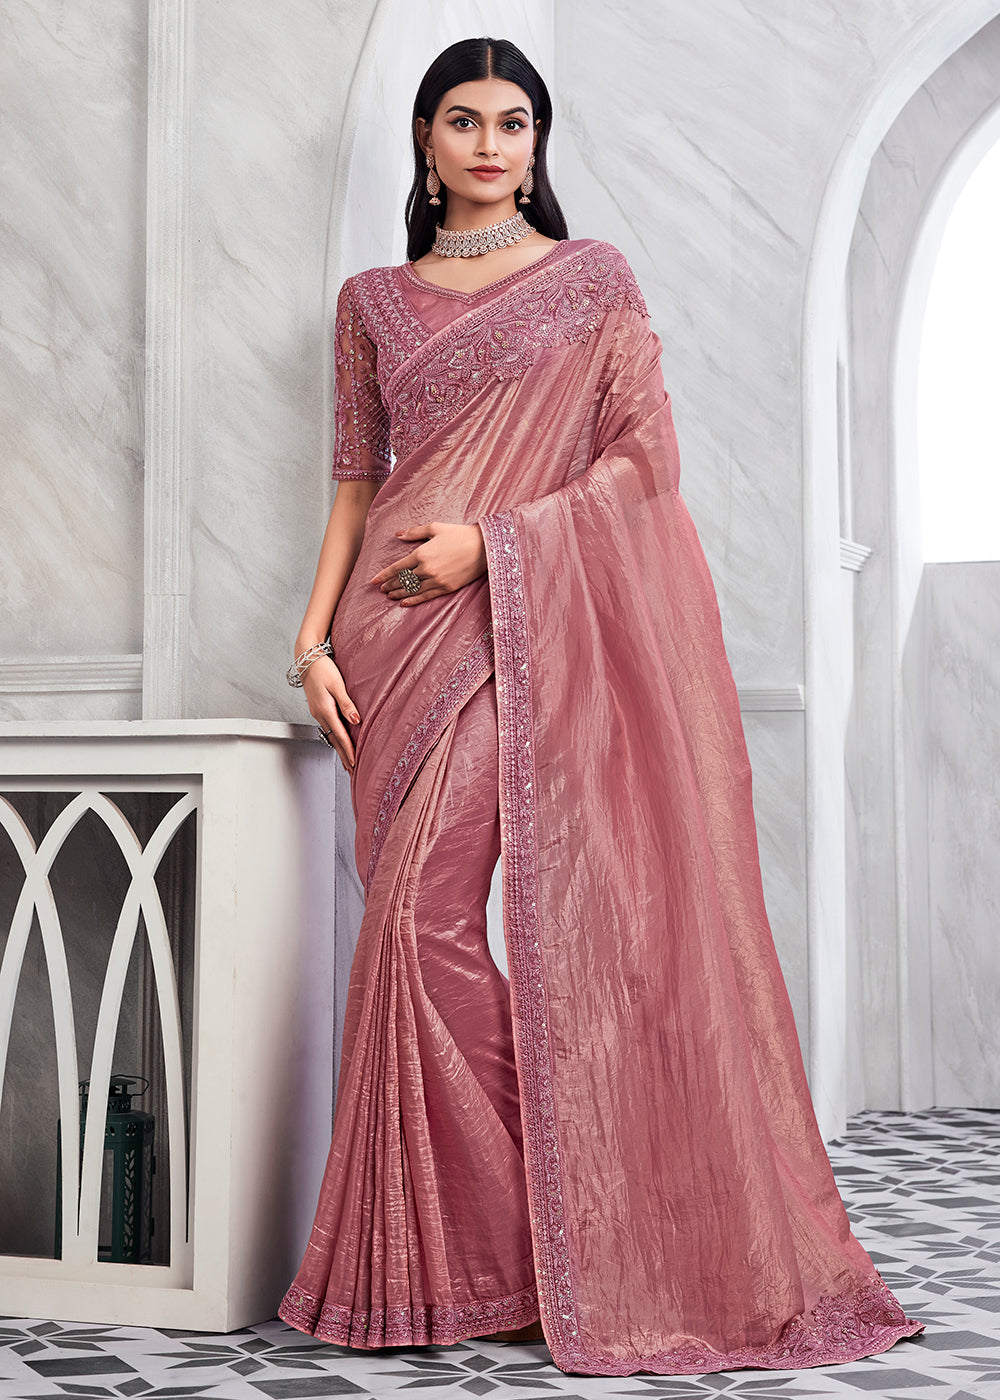 Buy Now Lovely Dusty Pink Silk Embroidered Designer Saree Online in USA, UK, Canada & Worldwide at Empress Clothing.